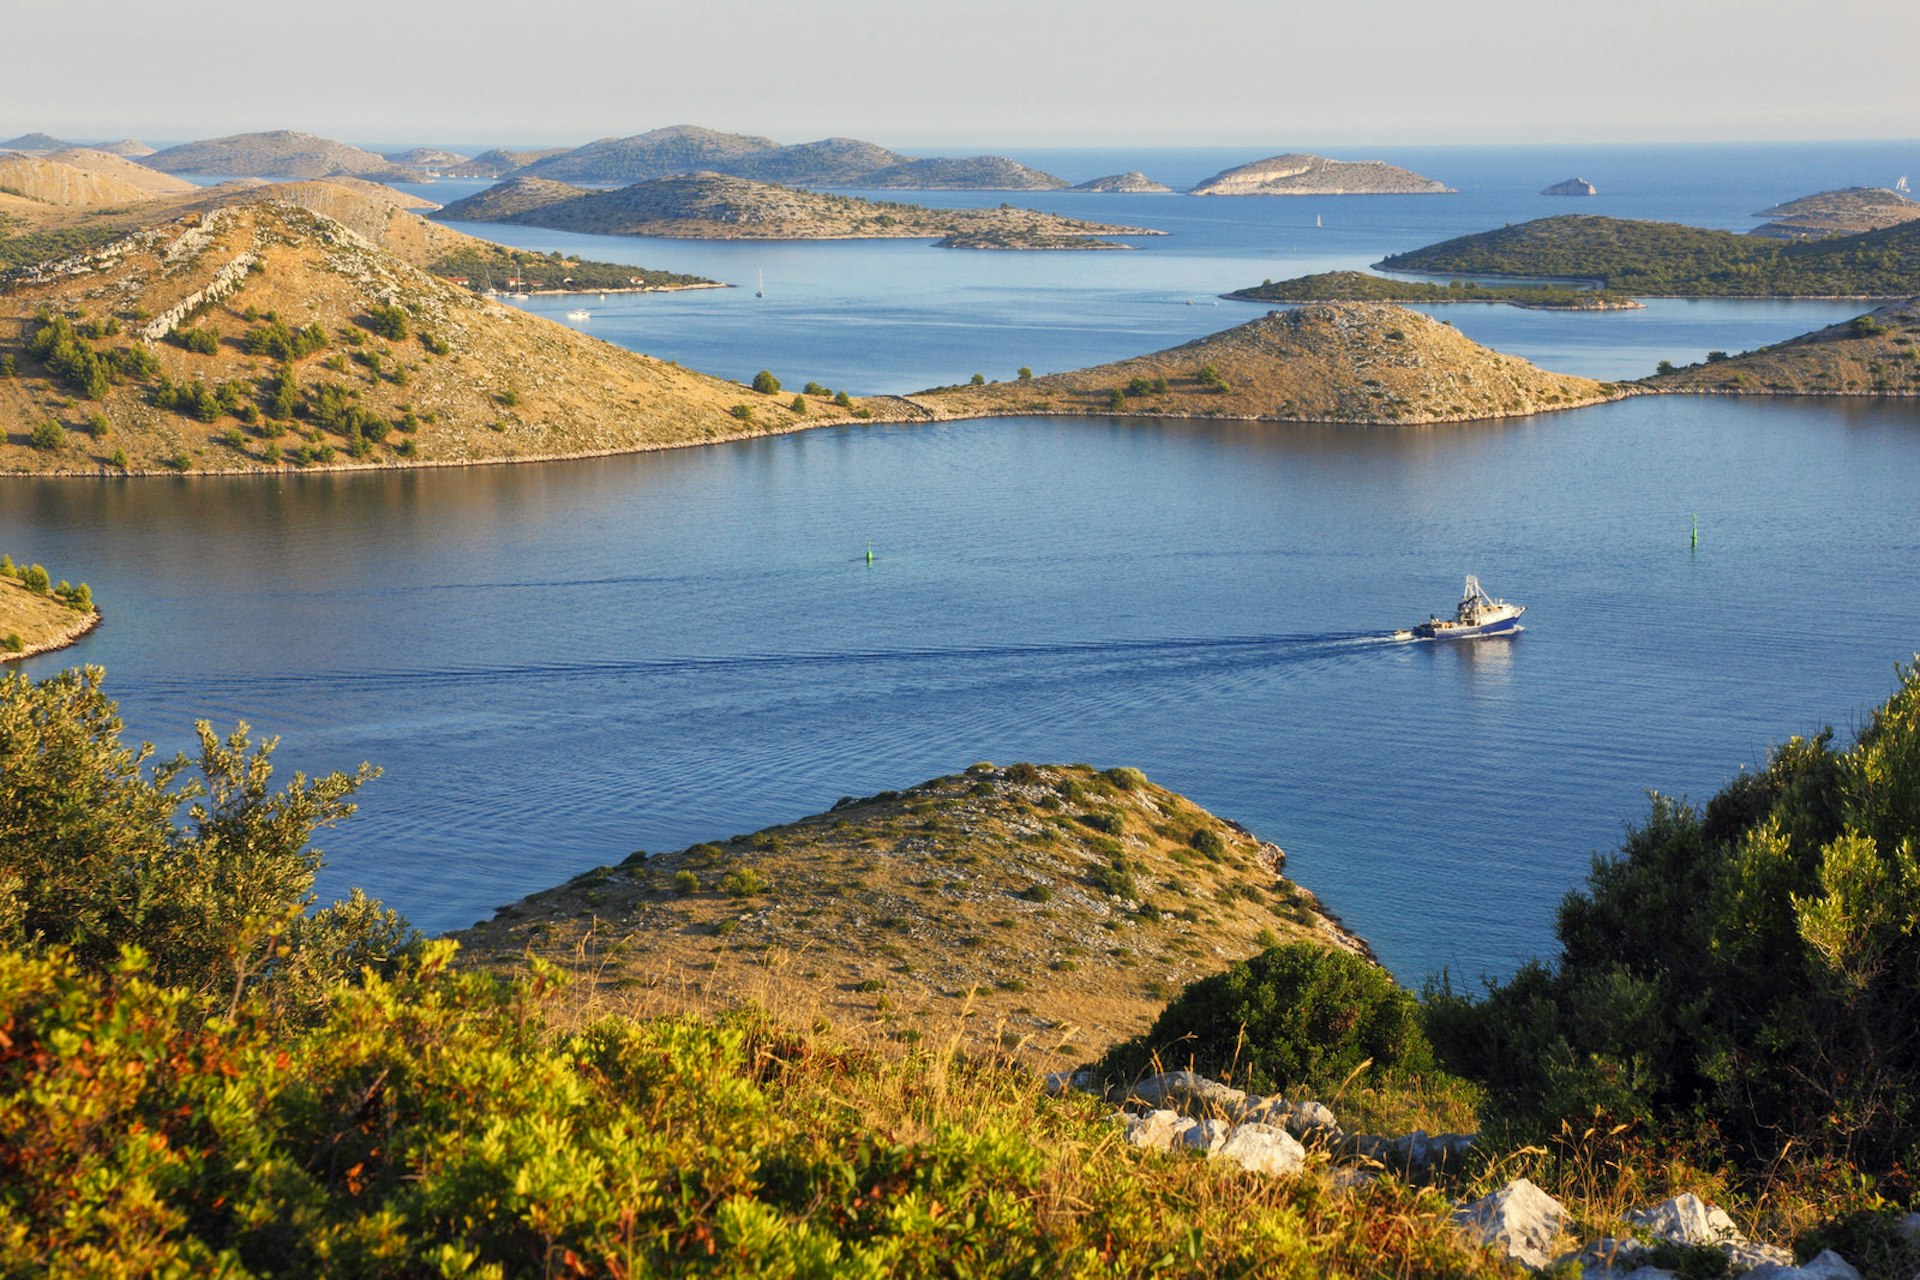 A fishing vessel passes between the Kornati Islands © Marcutti / Getty Images